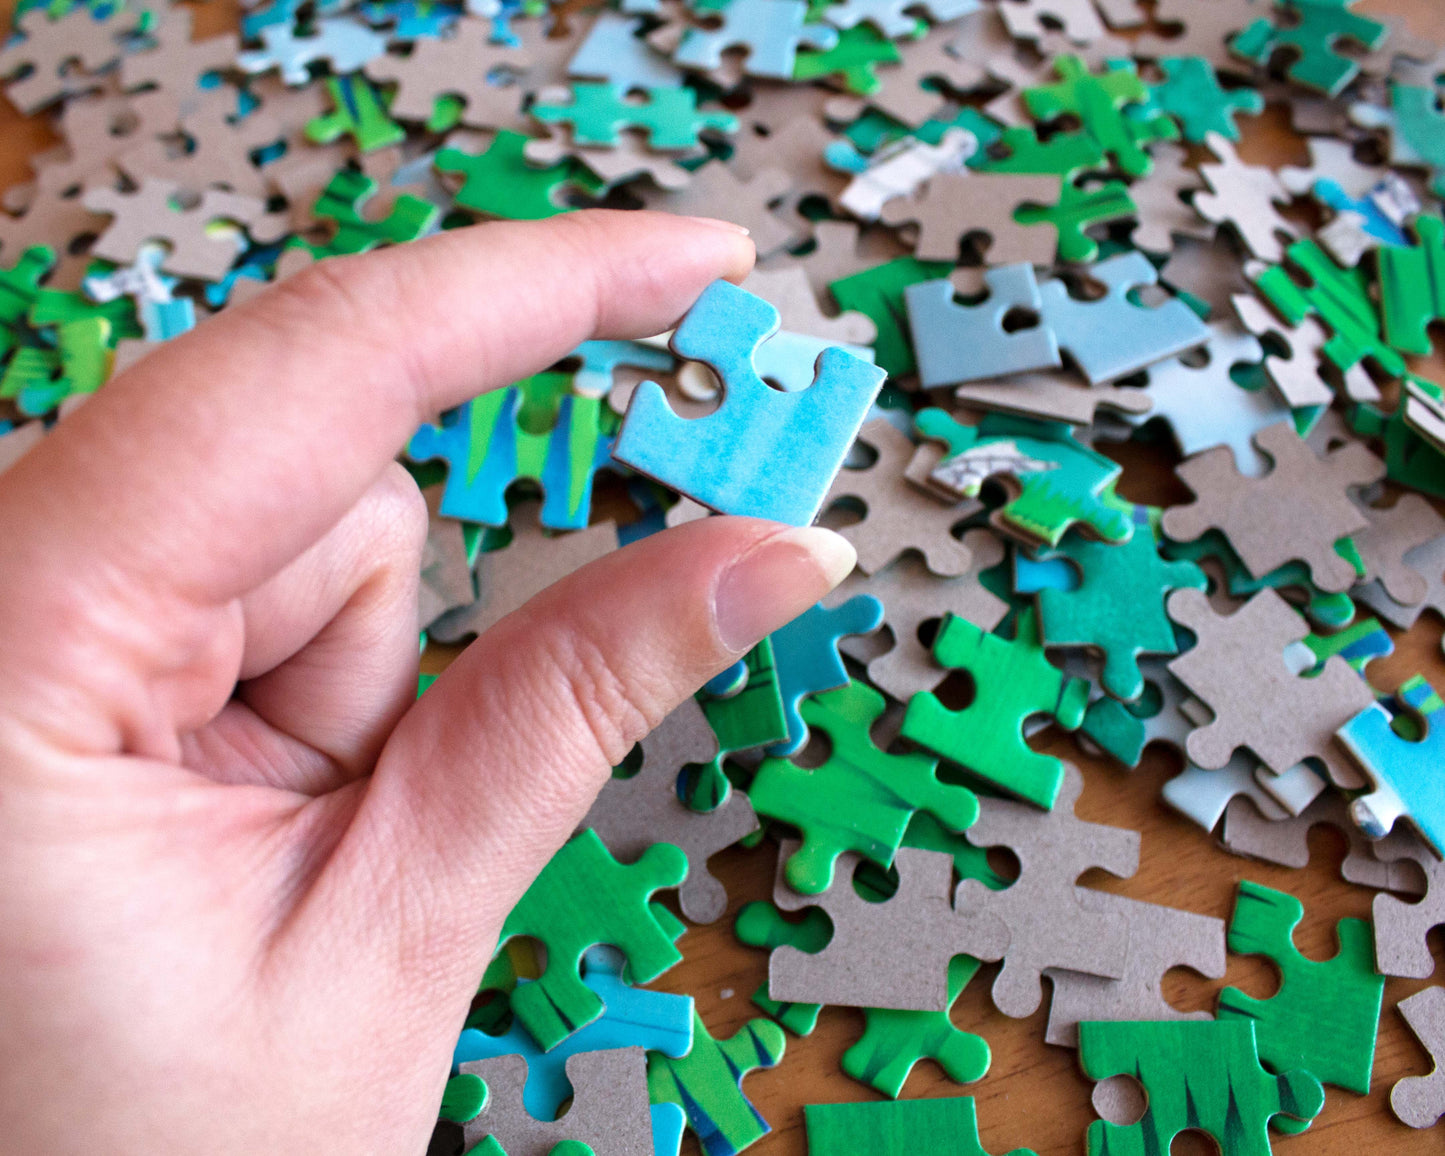 Image showing scale of jigsaw puzzle pieces (about 1x1")